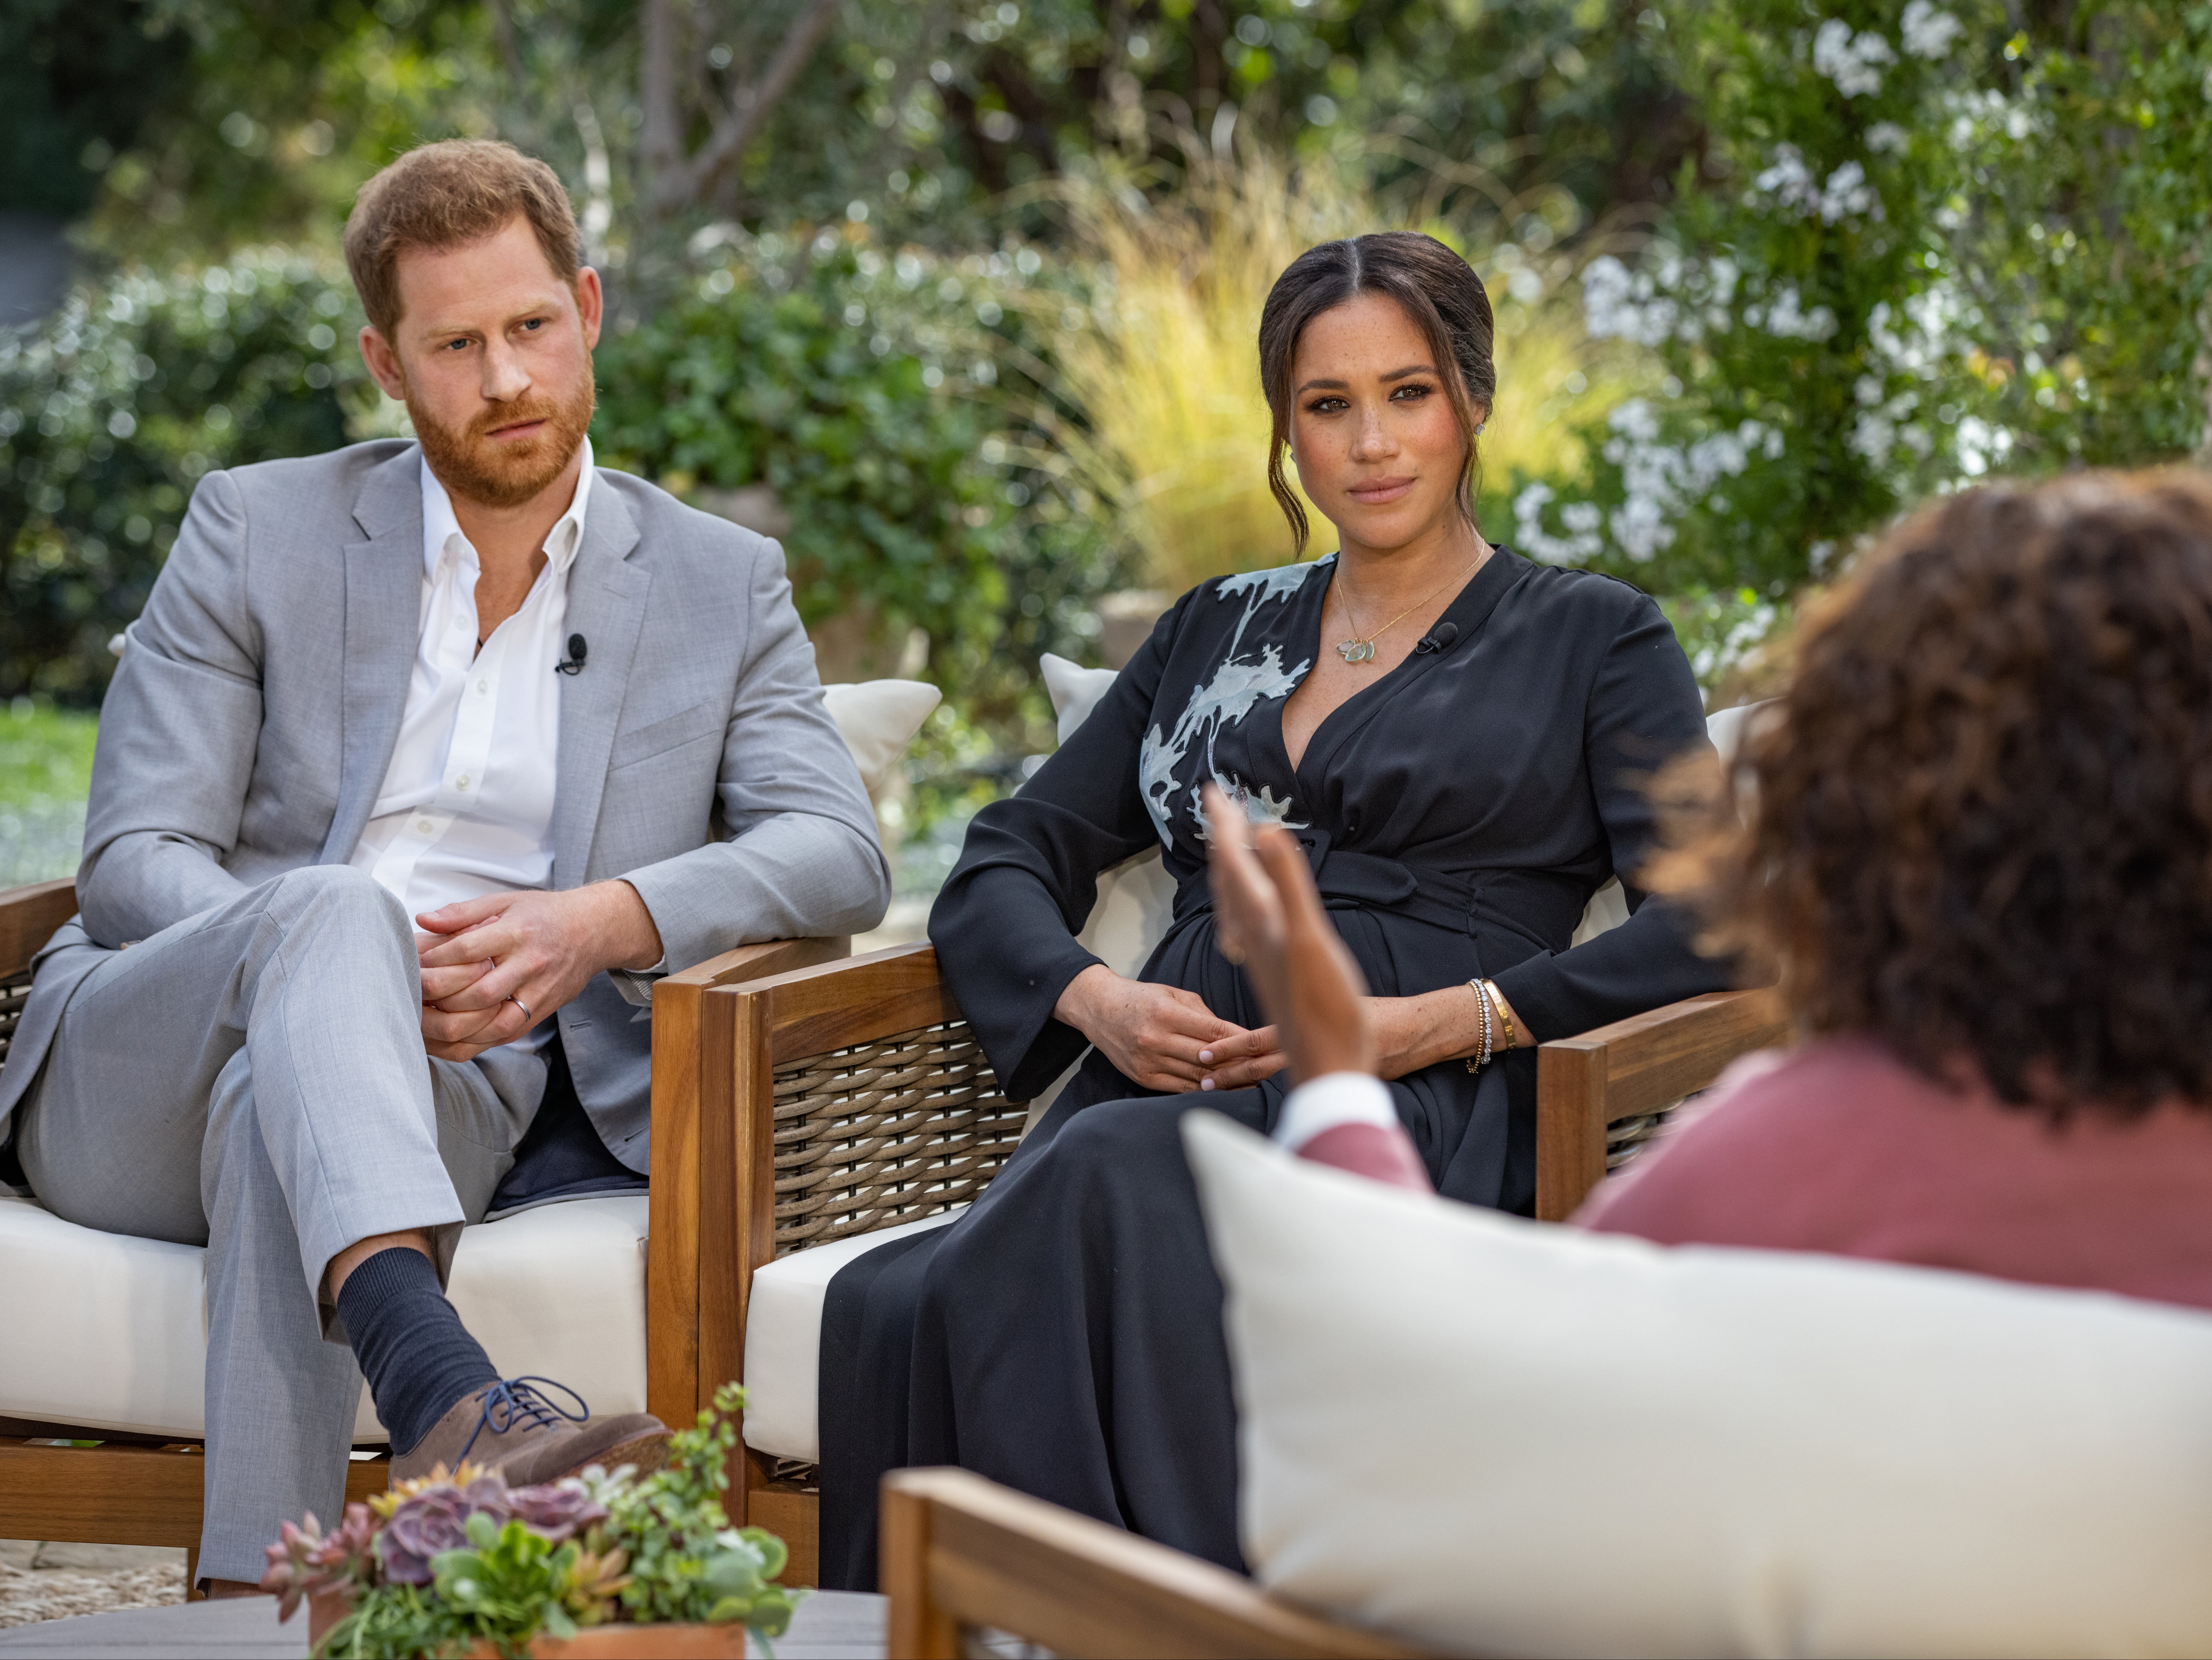 Prince Harry and Meghan Markle were interviewed by Oprah Winfrey in March